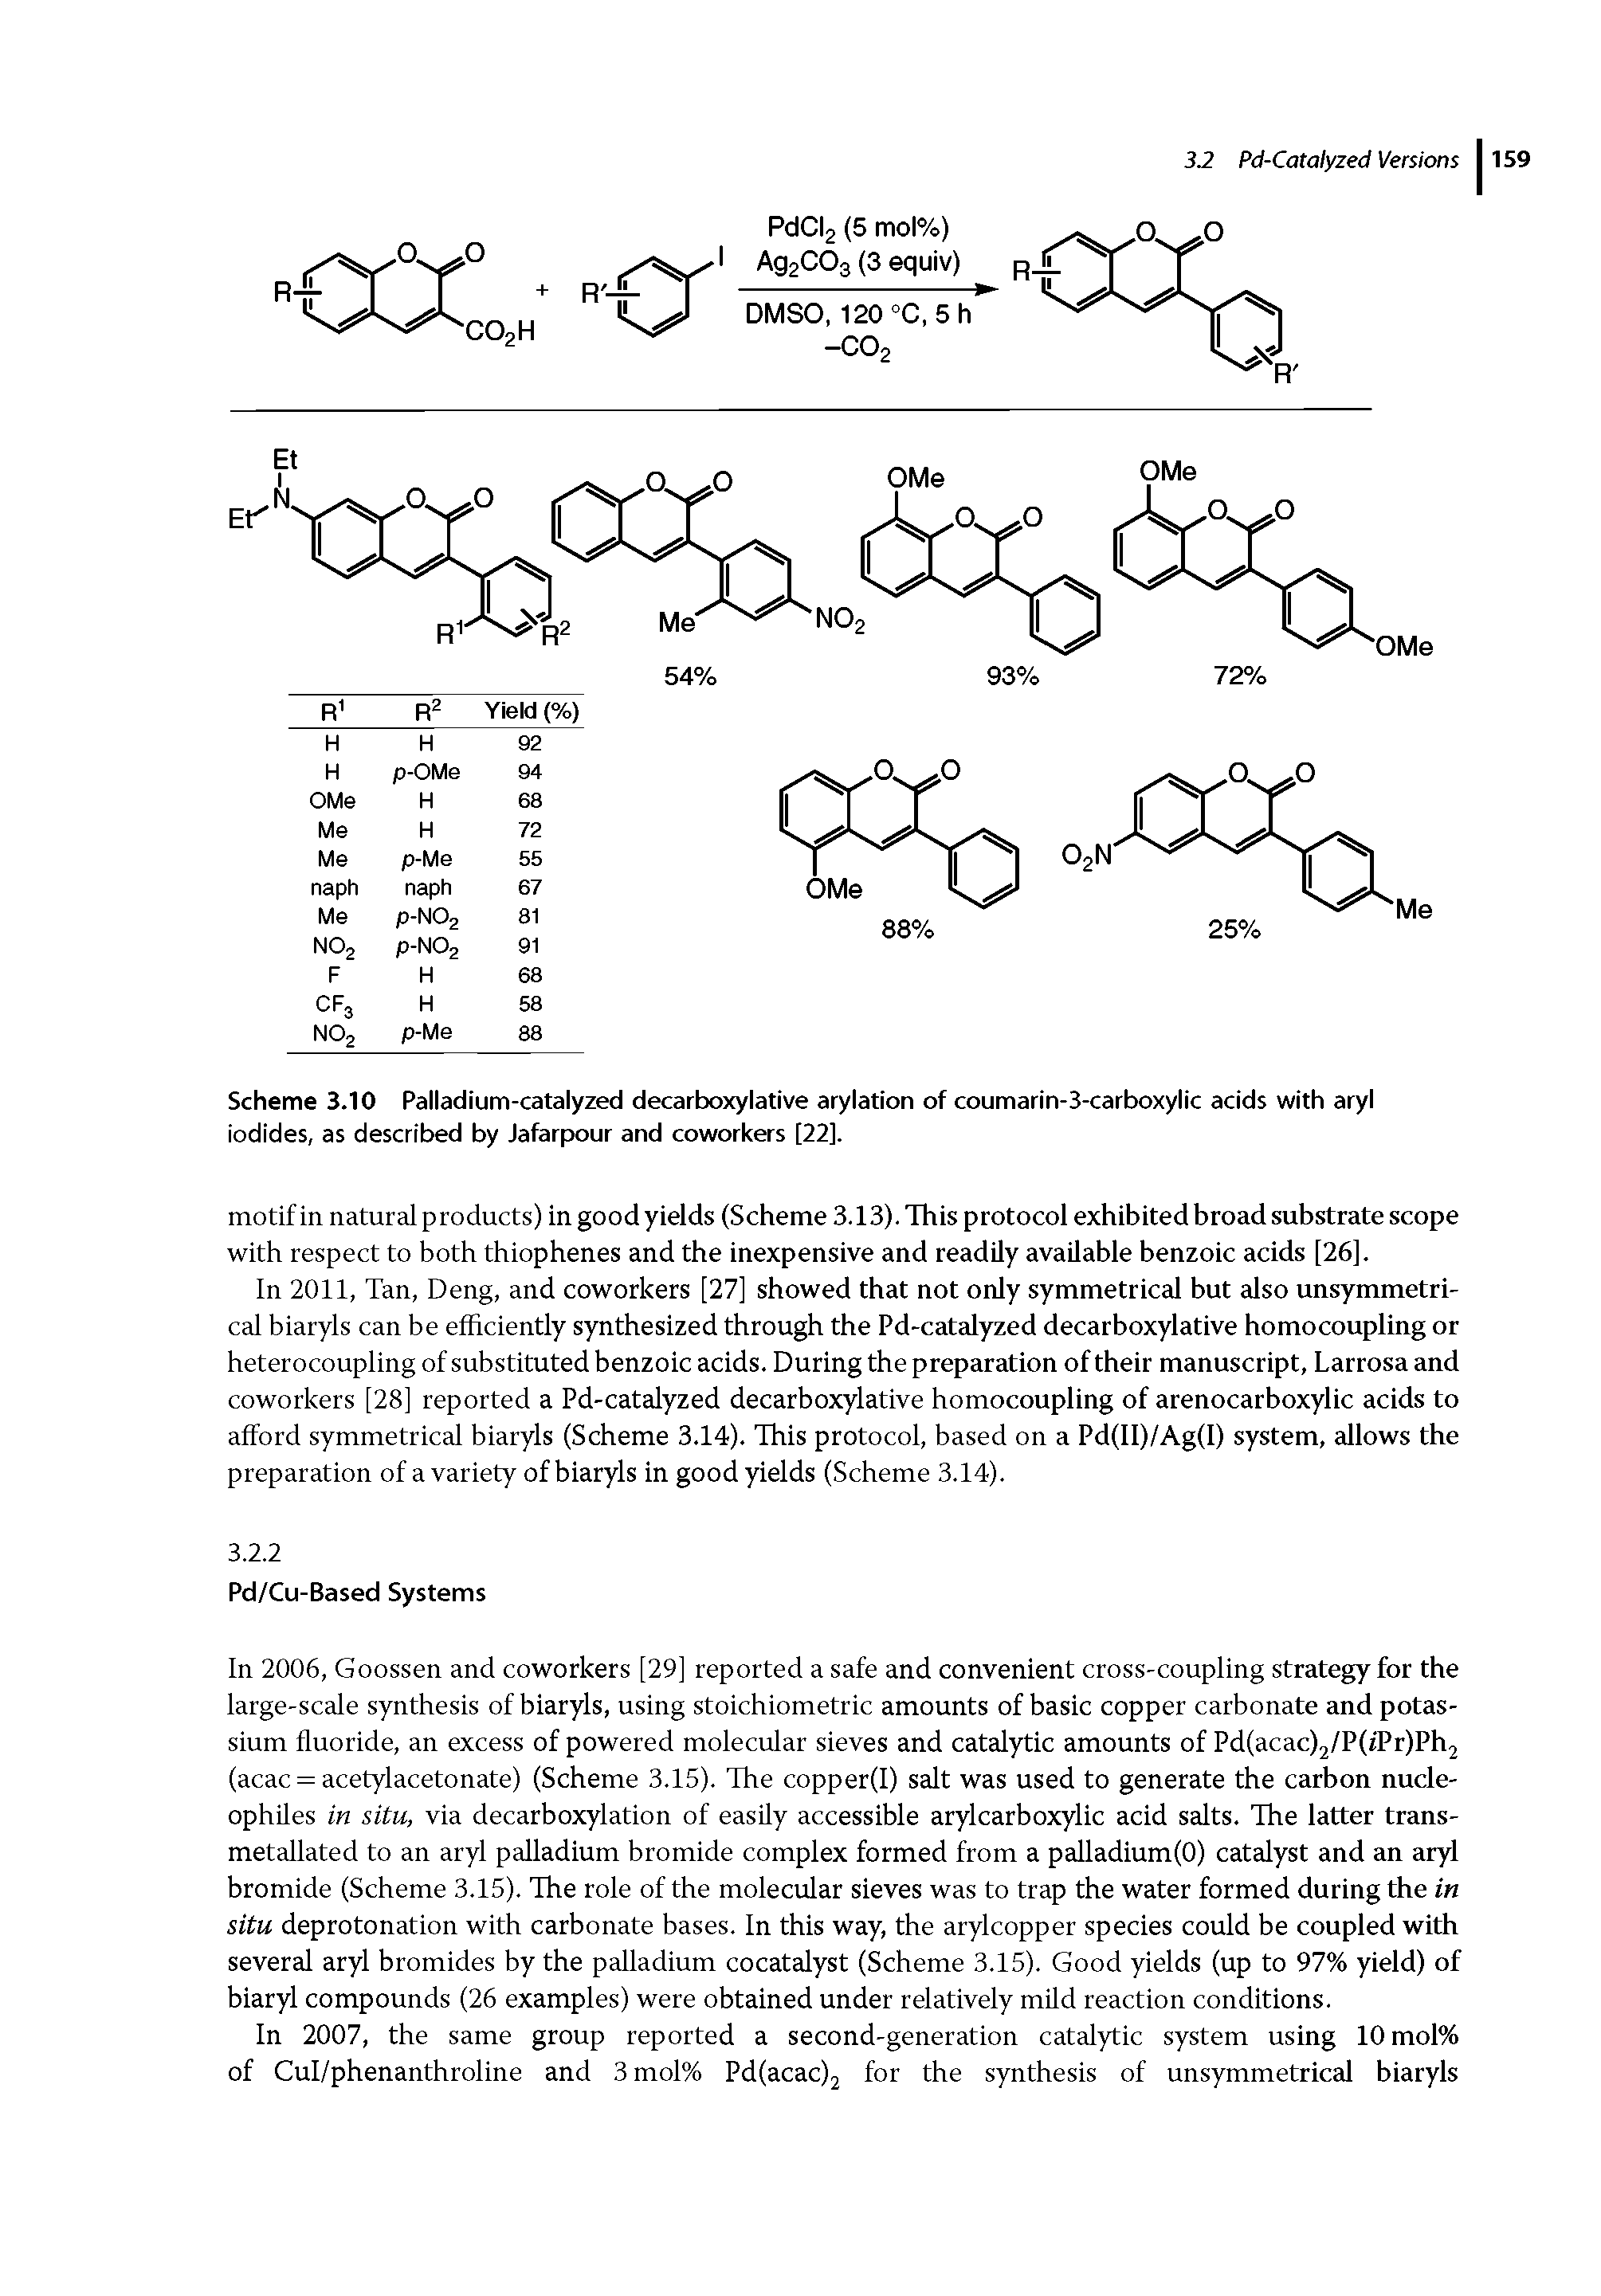 Scheme 3.10 Palladium-catalyzed decarboxylative atylation of coumarin-3-carboxylic acids with aryl iodides, as described by Jafarpour and coworkers [22].